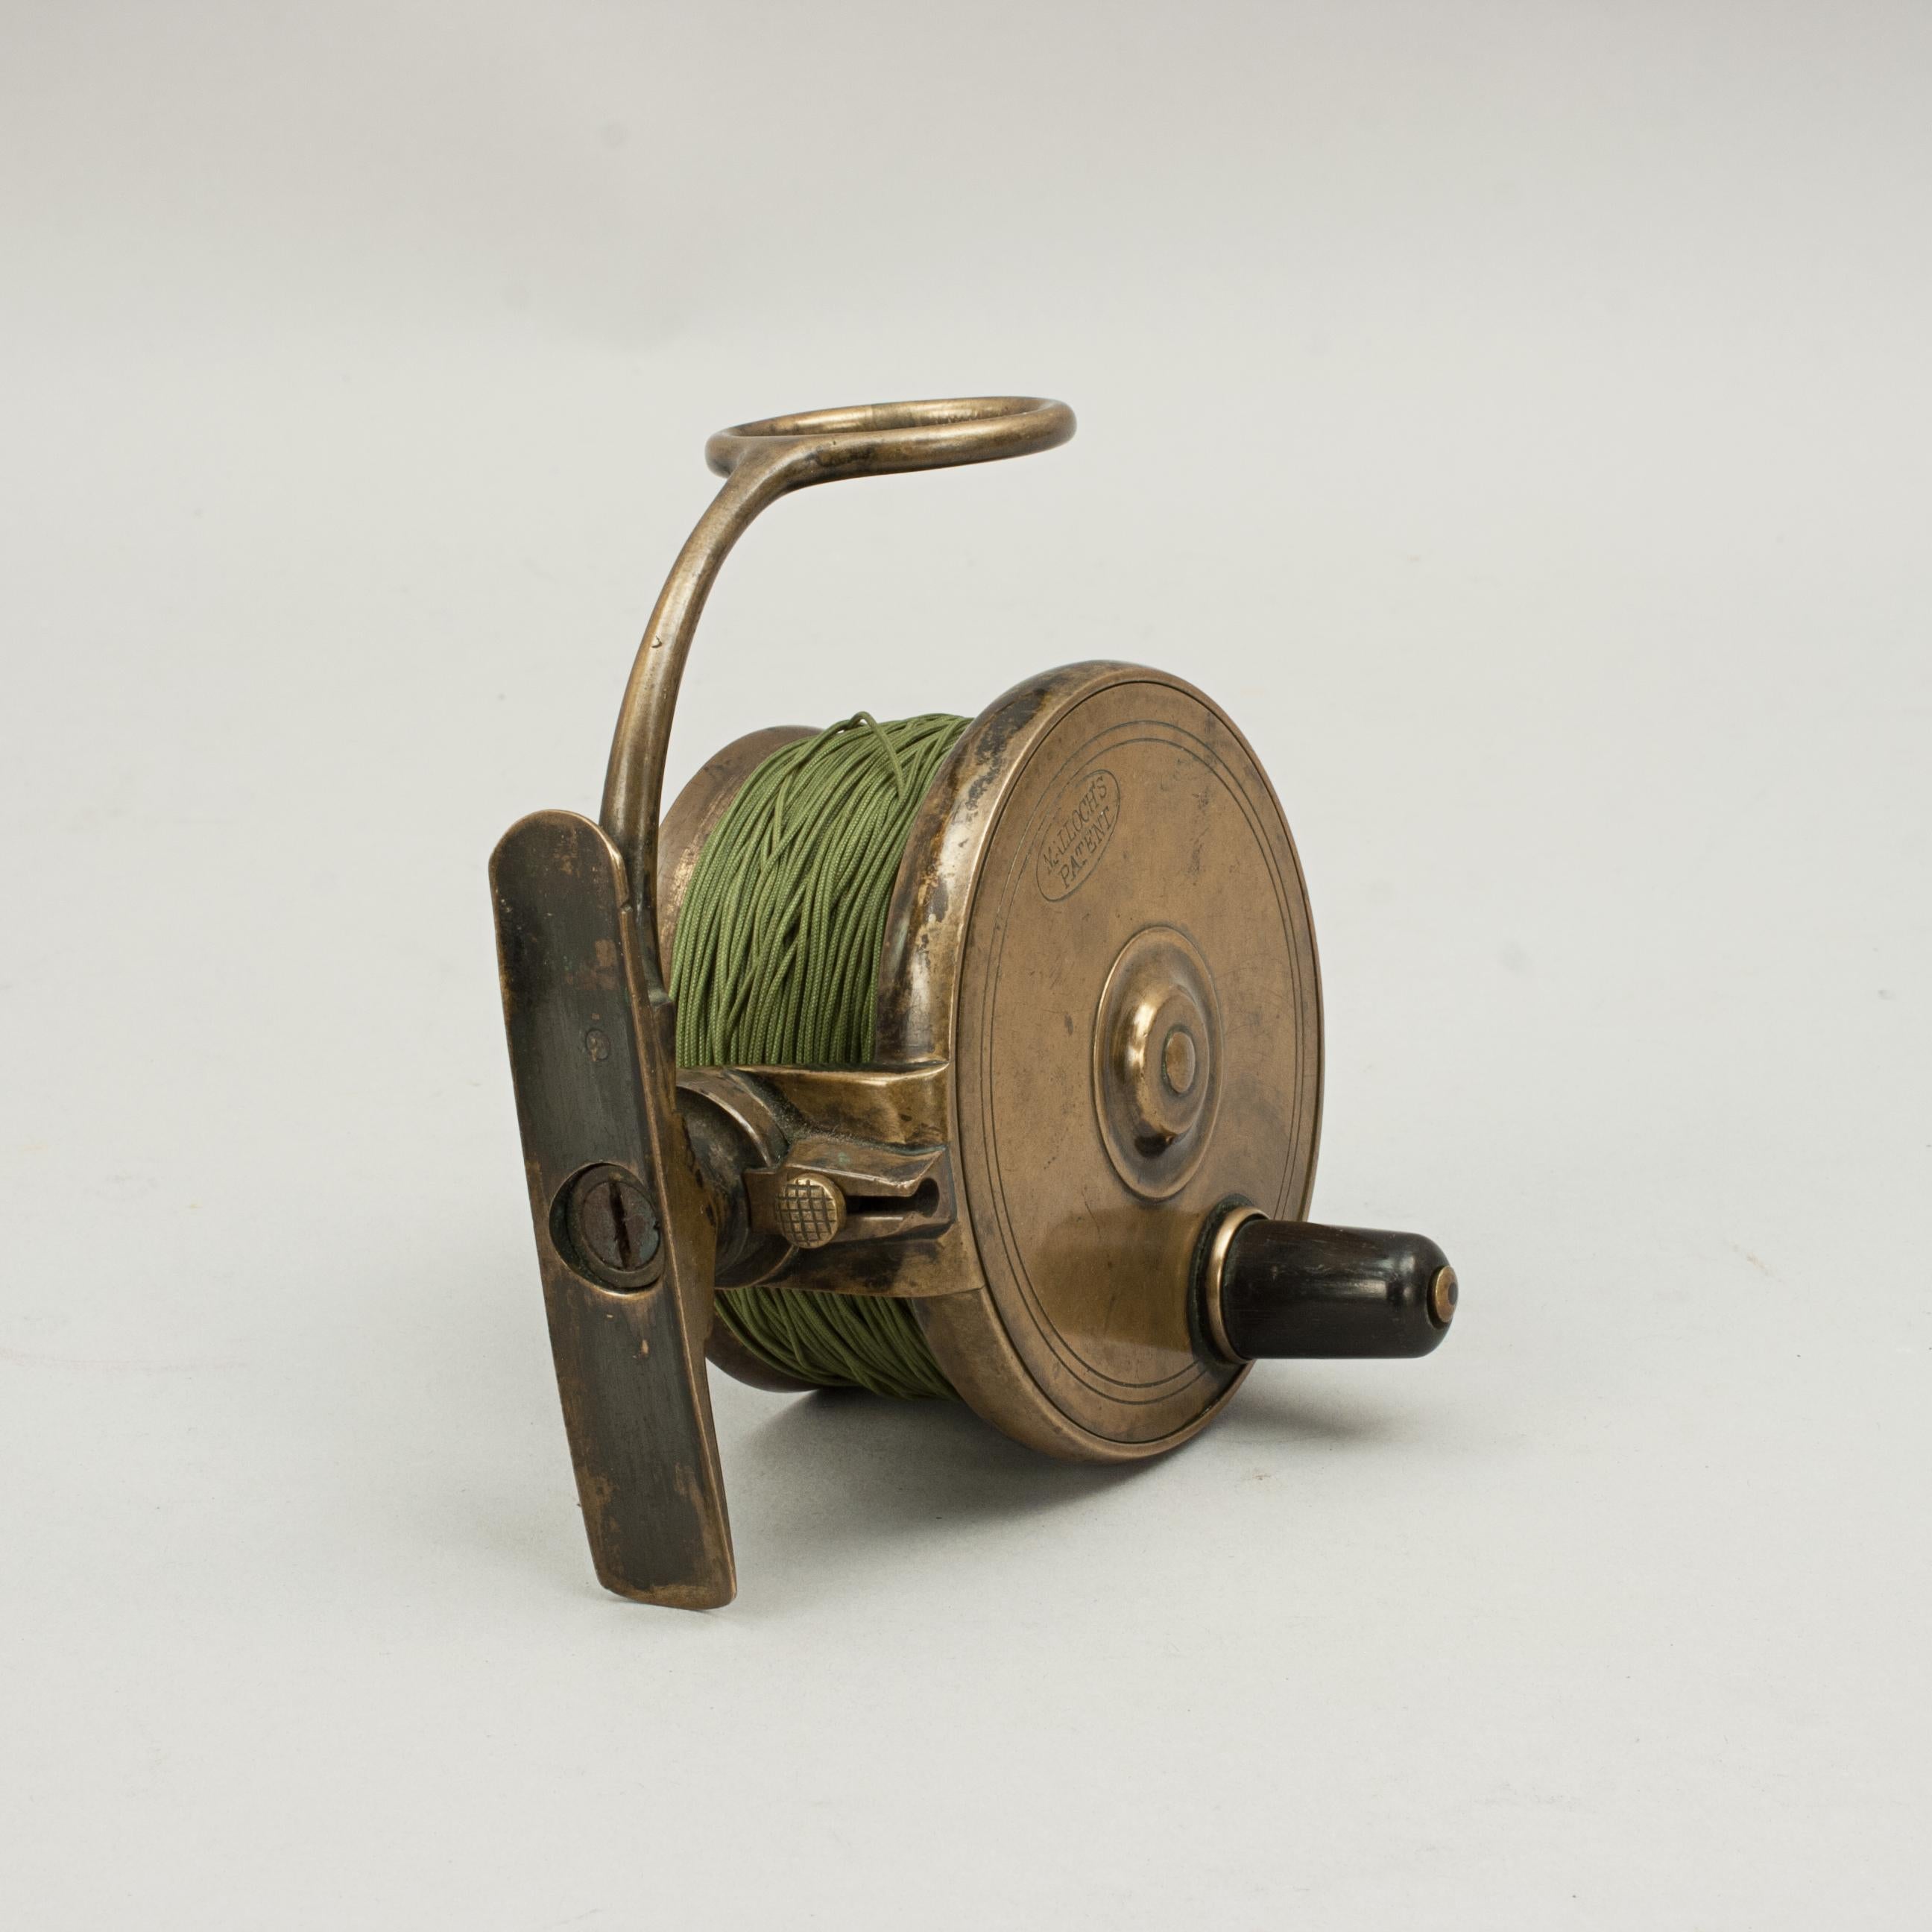 https://a.1stdibscdn.com/mulloch-brass-side-casting-fishing-reel-for-sale-picture-2/f_9757/f_277071621646840909319/28842a_master.jpg